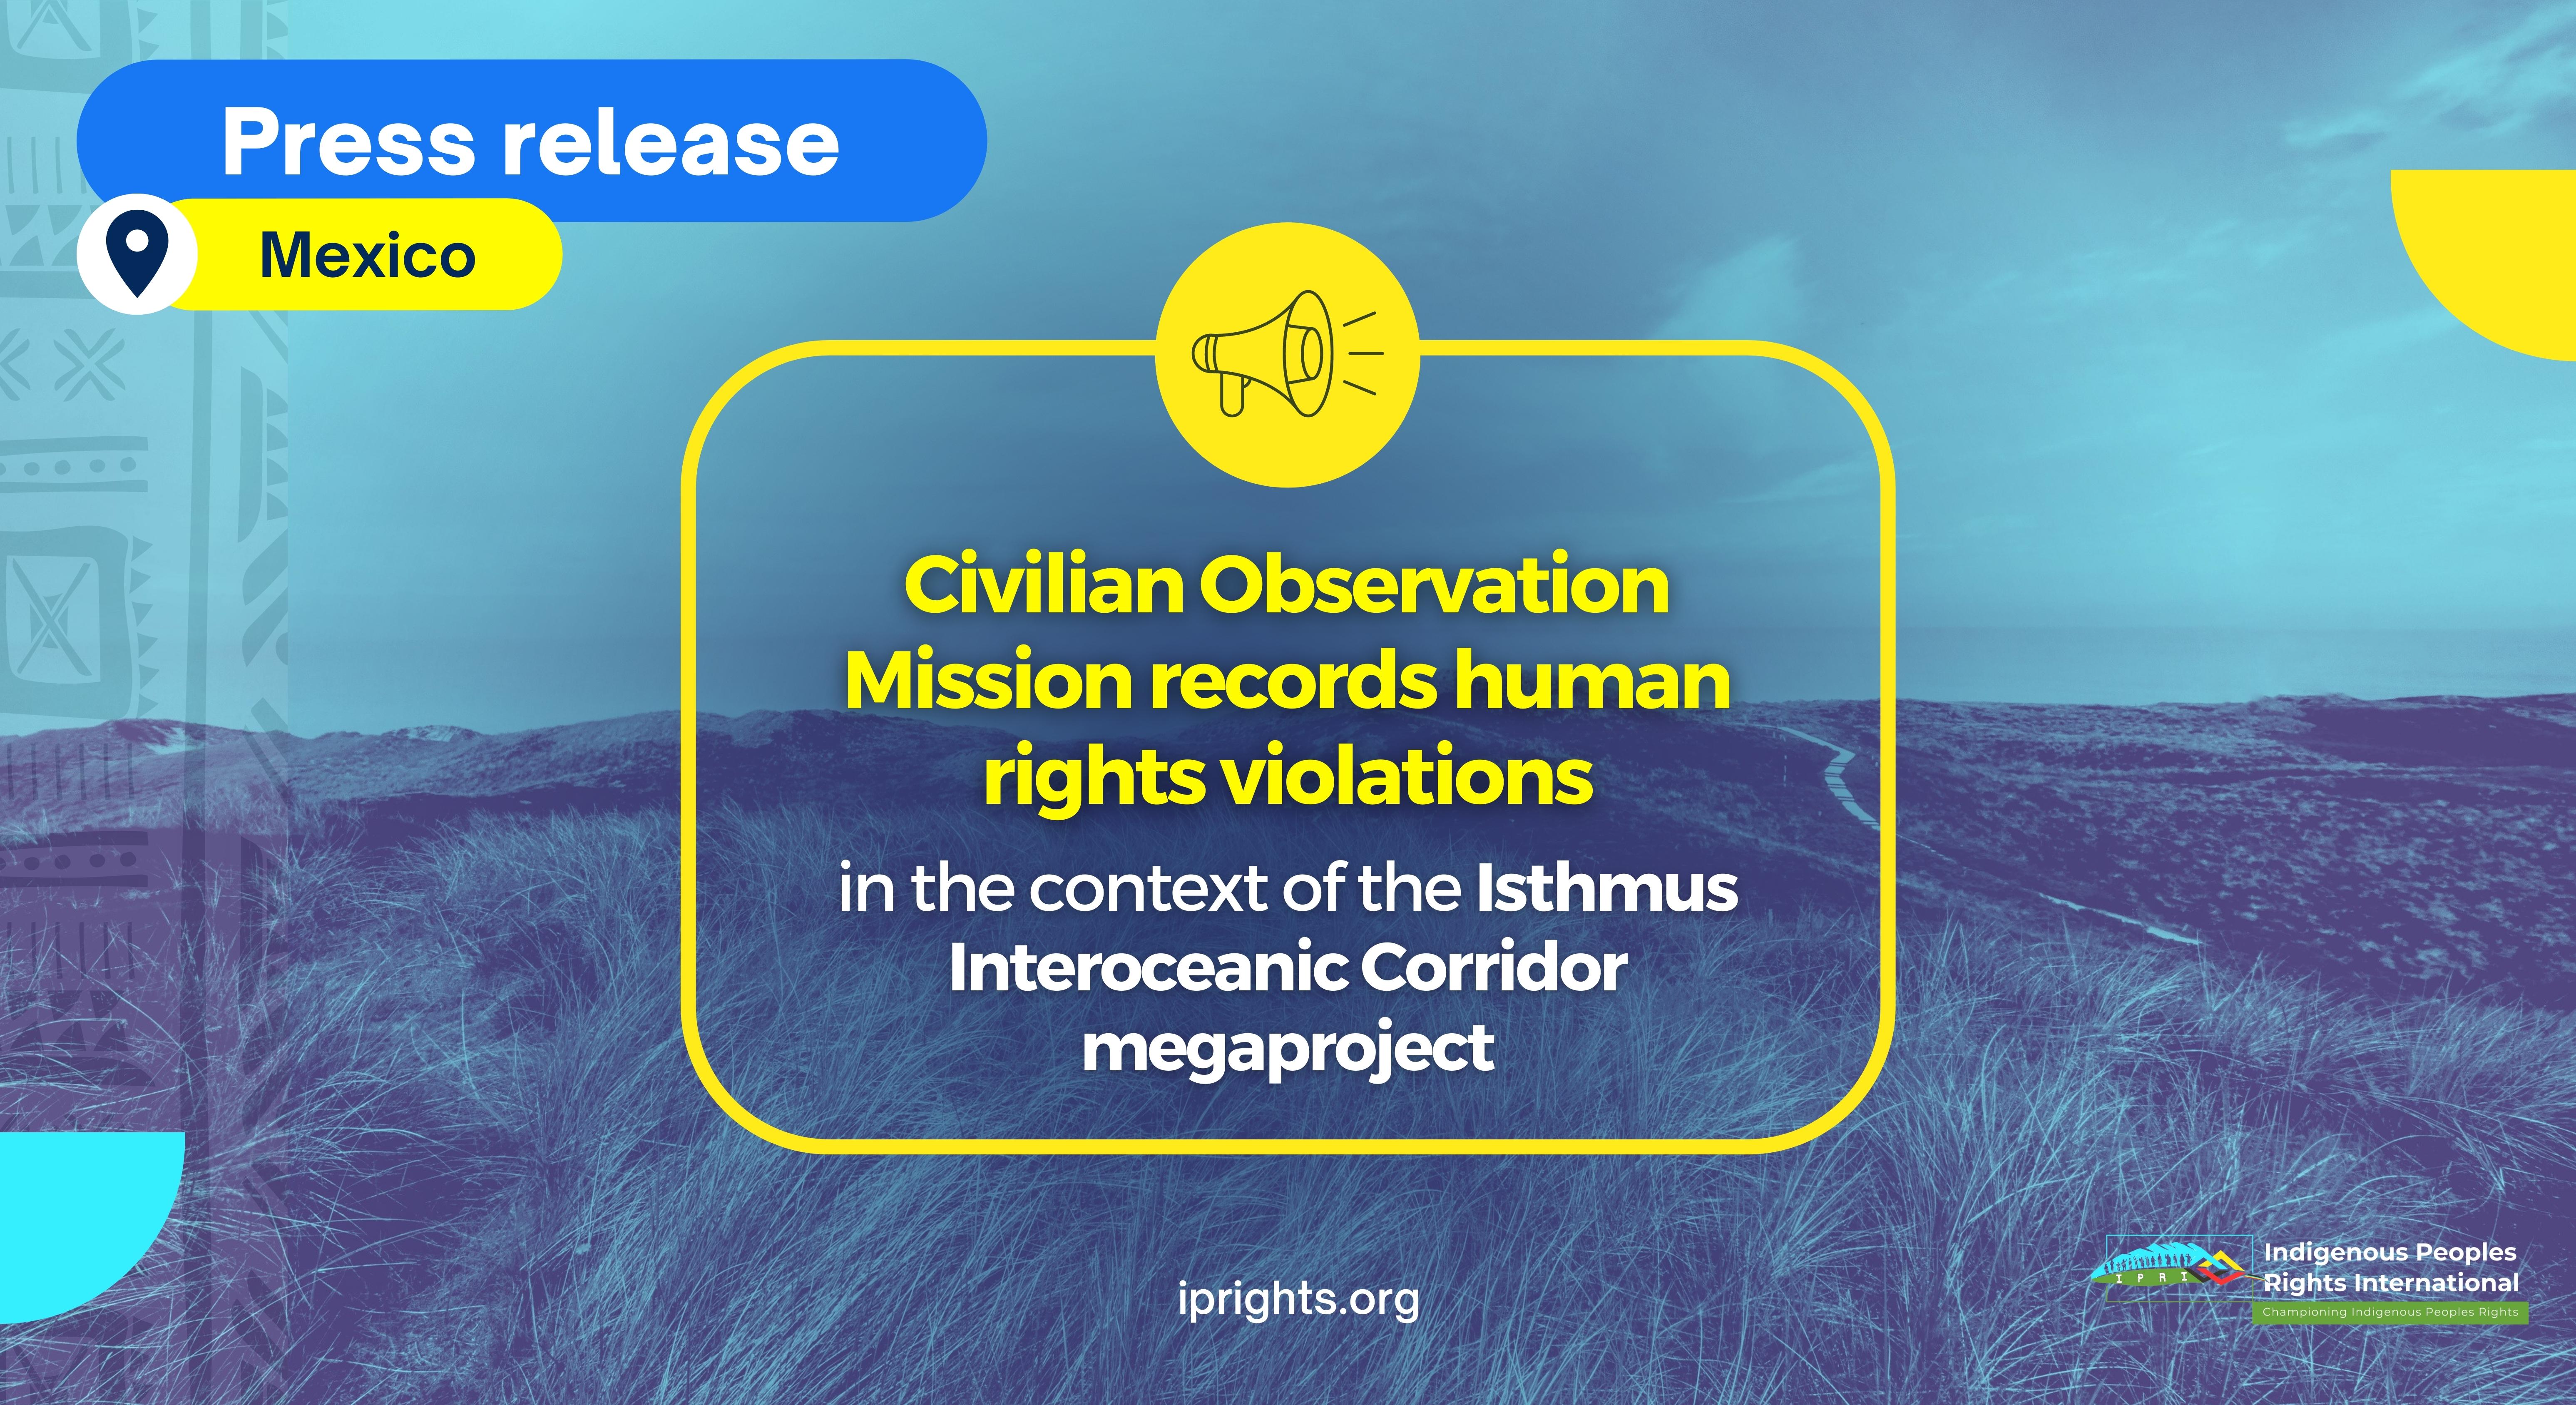 Civilian Observation Mission records human rights violations in the context of the Isthmus Interoceanic Corridor megaproject